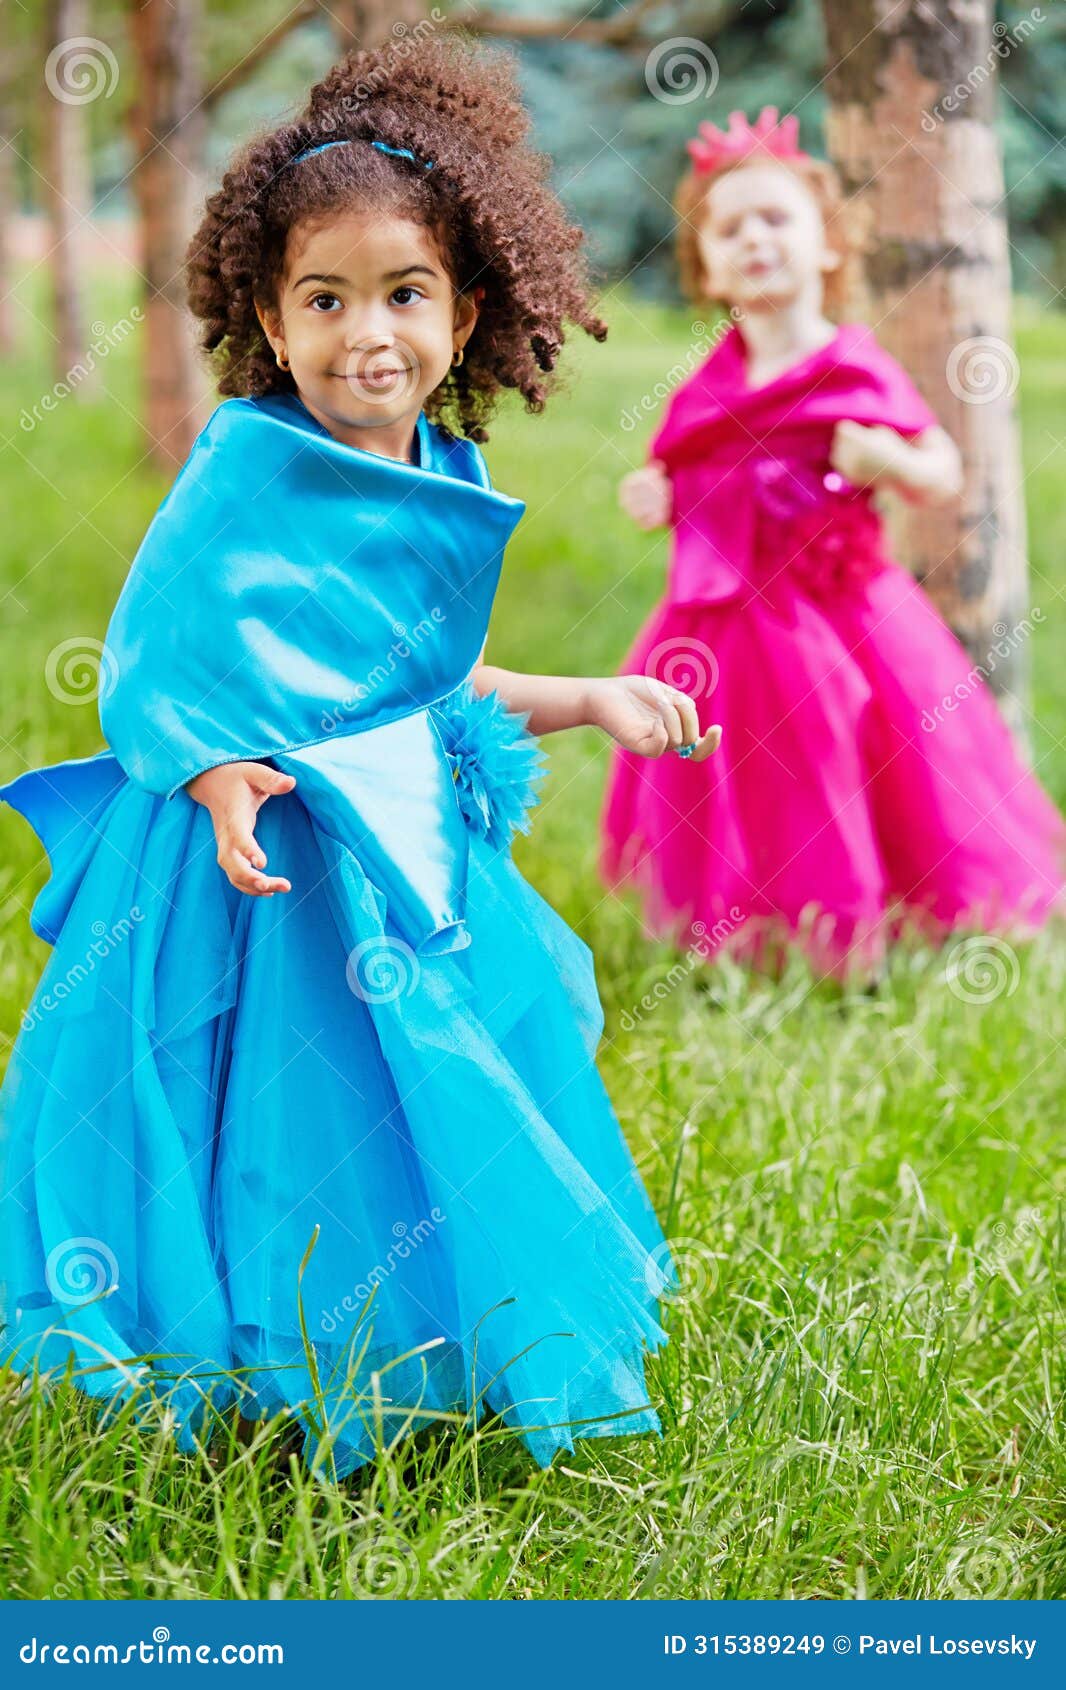 two little girls in puffy gowns perform on grassy